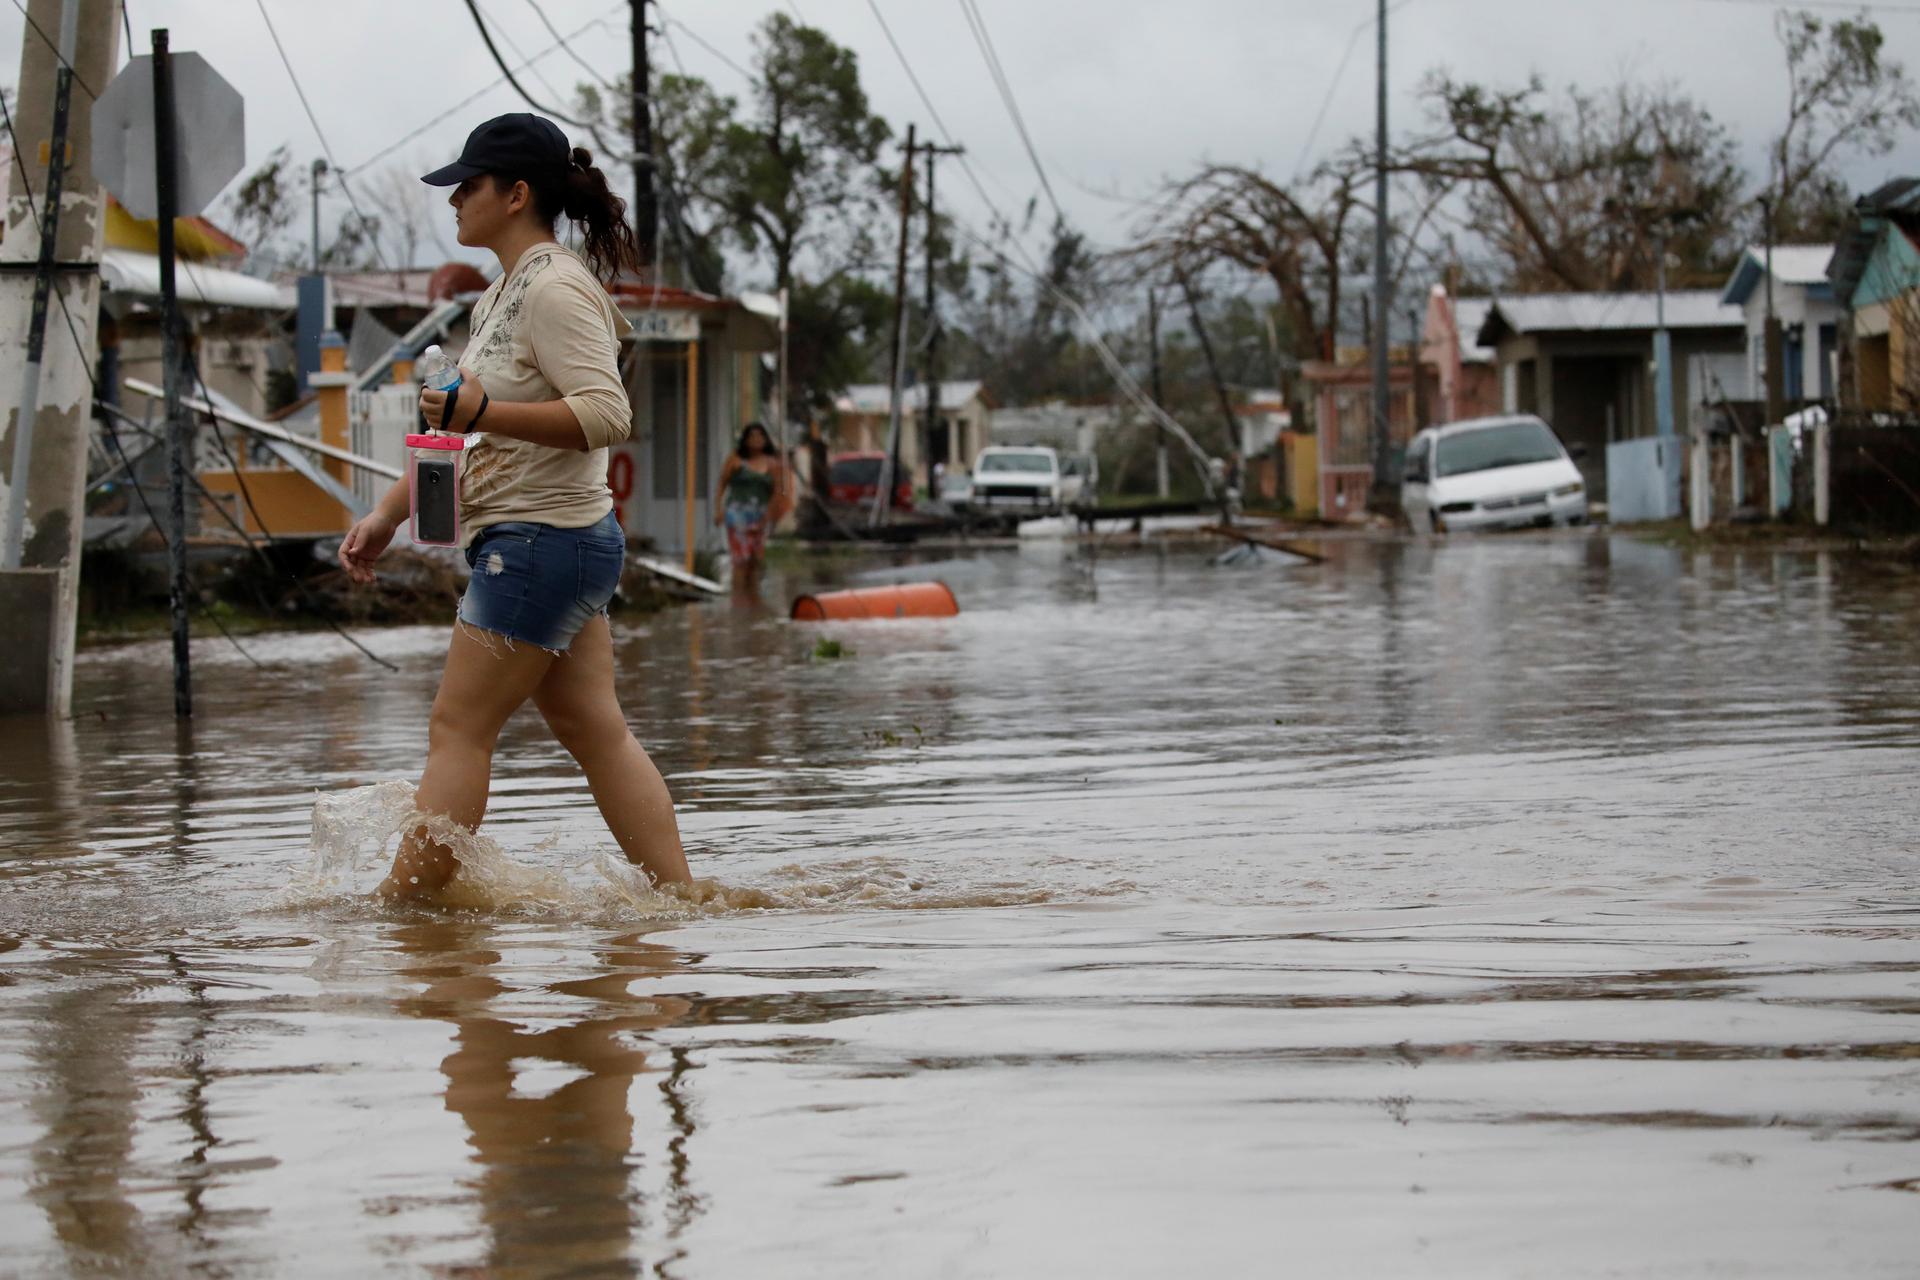 A woman wades through a flooded street after the area was hit by Hurricane Maria in Salinas, Puerto Rico, Sept. 21, 2017